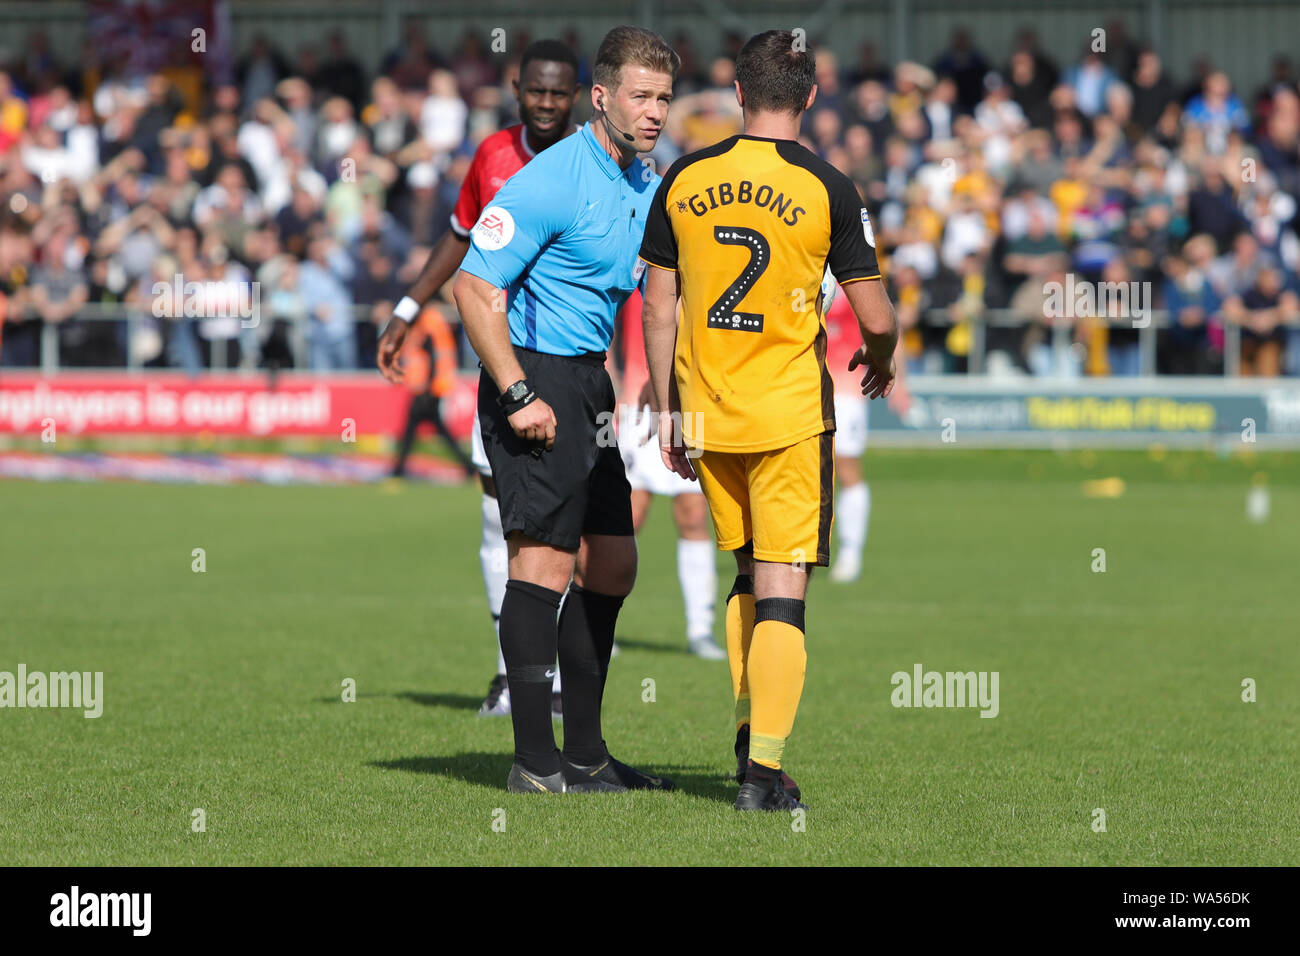 Salford, UK. 17th August 2019. James Gibbons argues with referee Anthony Backhouse during the Sky Bet League 2 match between Salford City and Port Vale at Moor Lane, Salford on Saturday 17th August 2019. Editorial use only, license required for commercial use. Photograph may only be used for newspaper and/or magazine editorial purposes. (Credit: Luke Nickerson | MI News) Credit: MI News & Sport /Alamy Live News Stock Photo